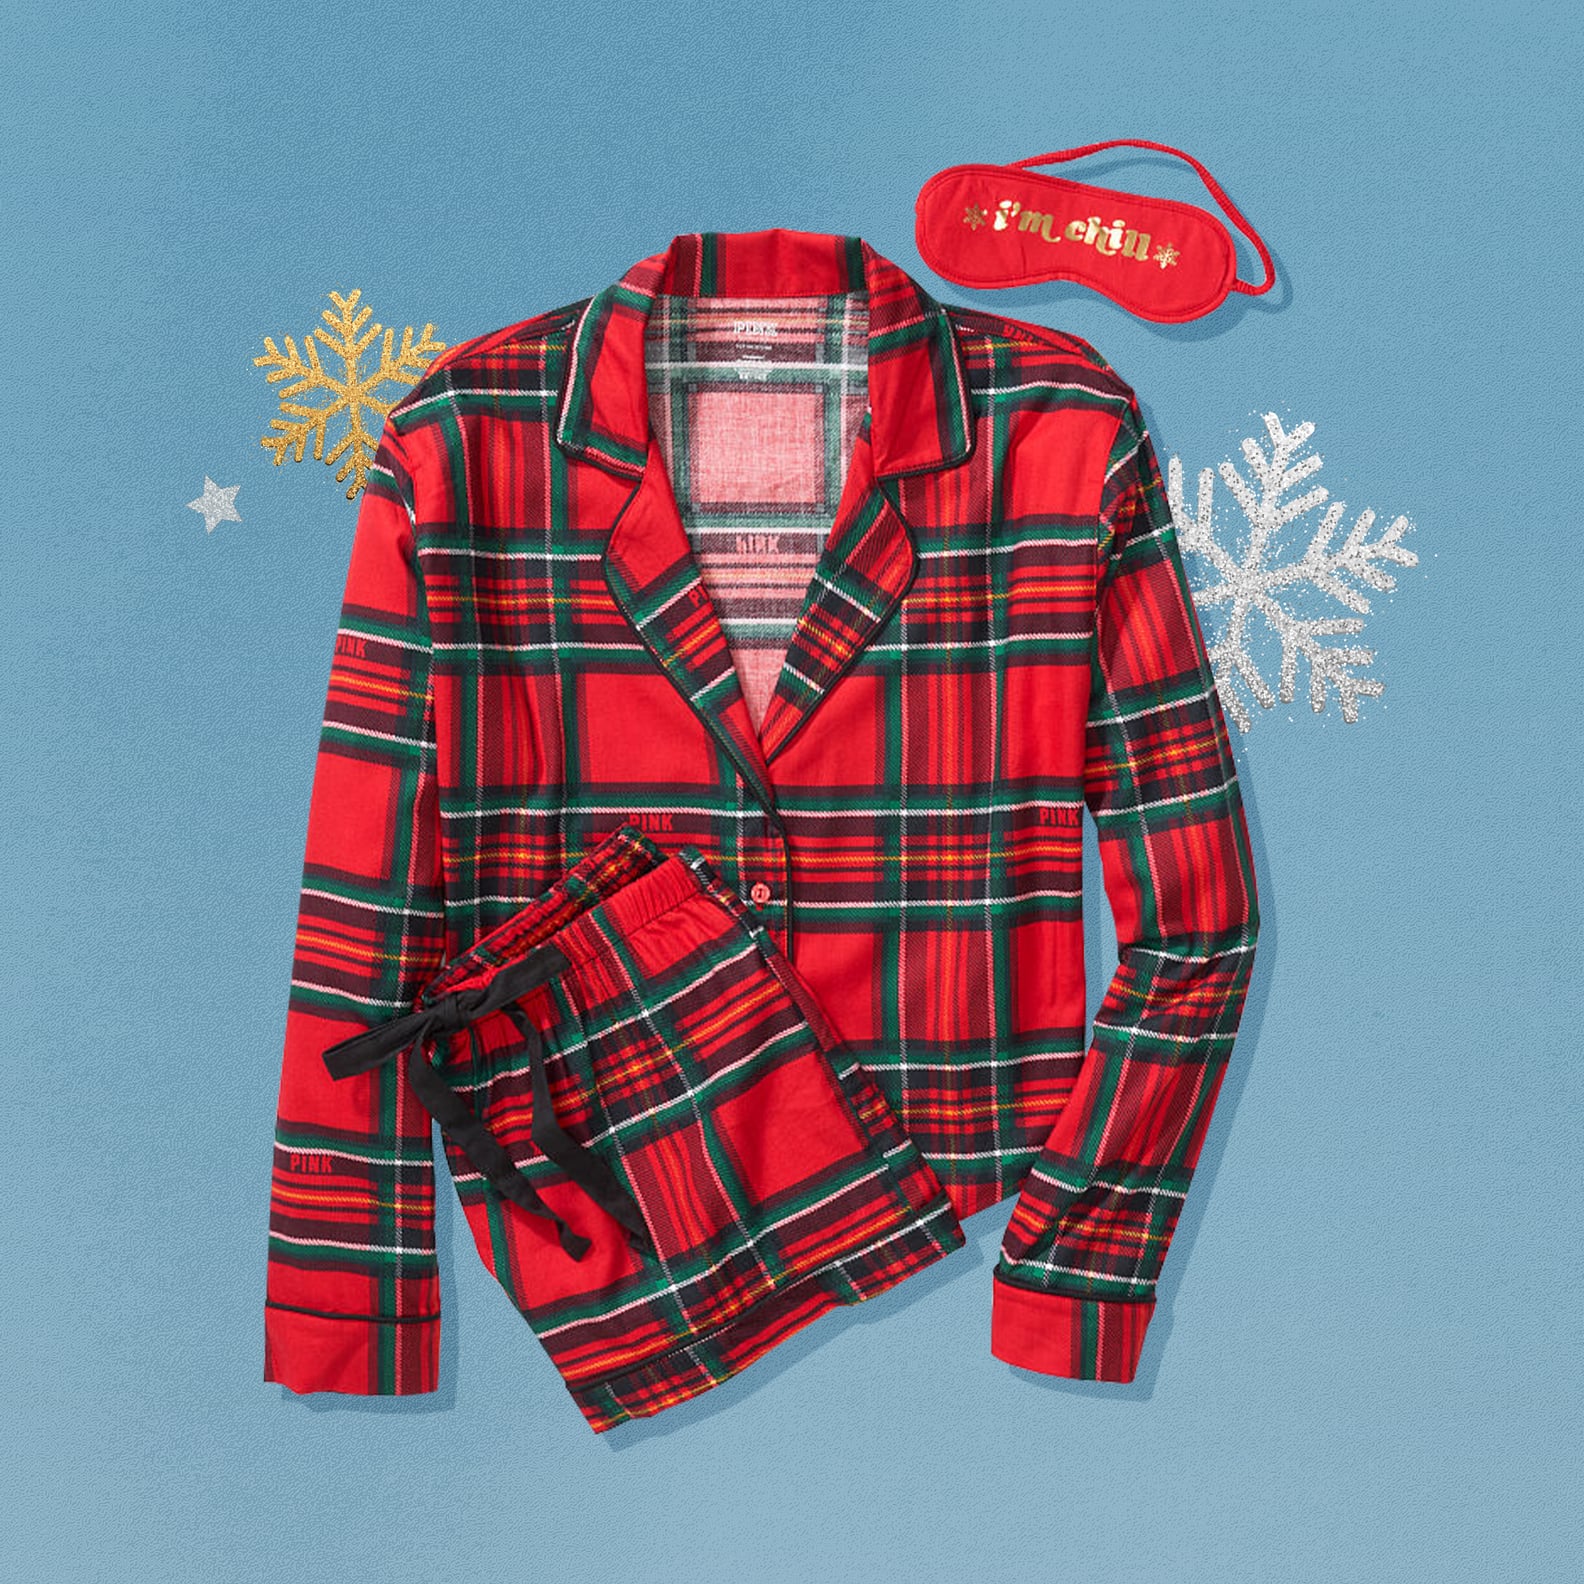 Cozy-Chic Gifts From PINK | POPSUGAR Fashion